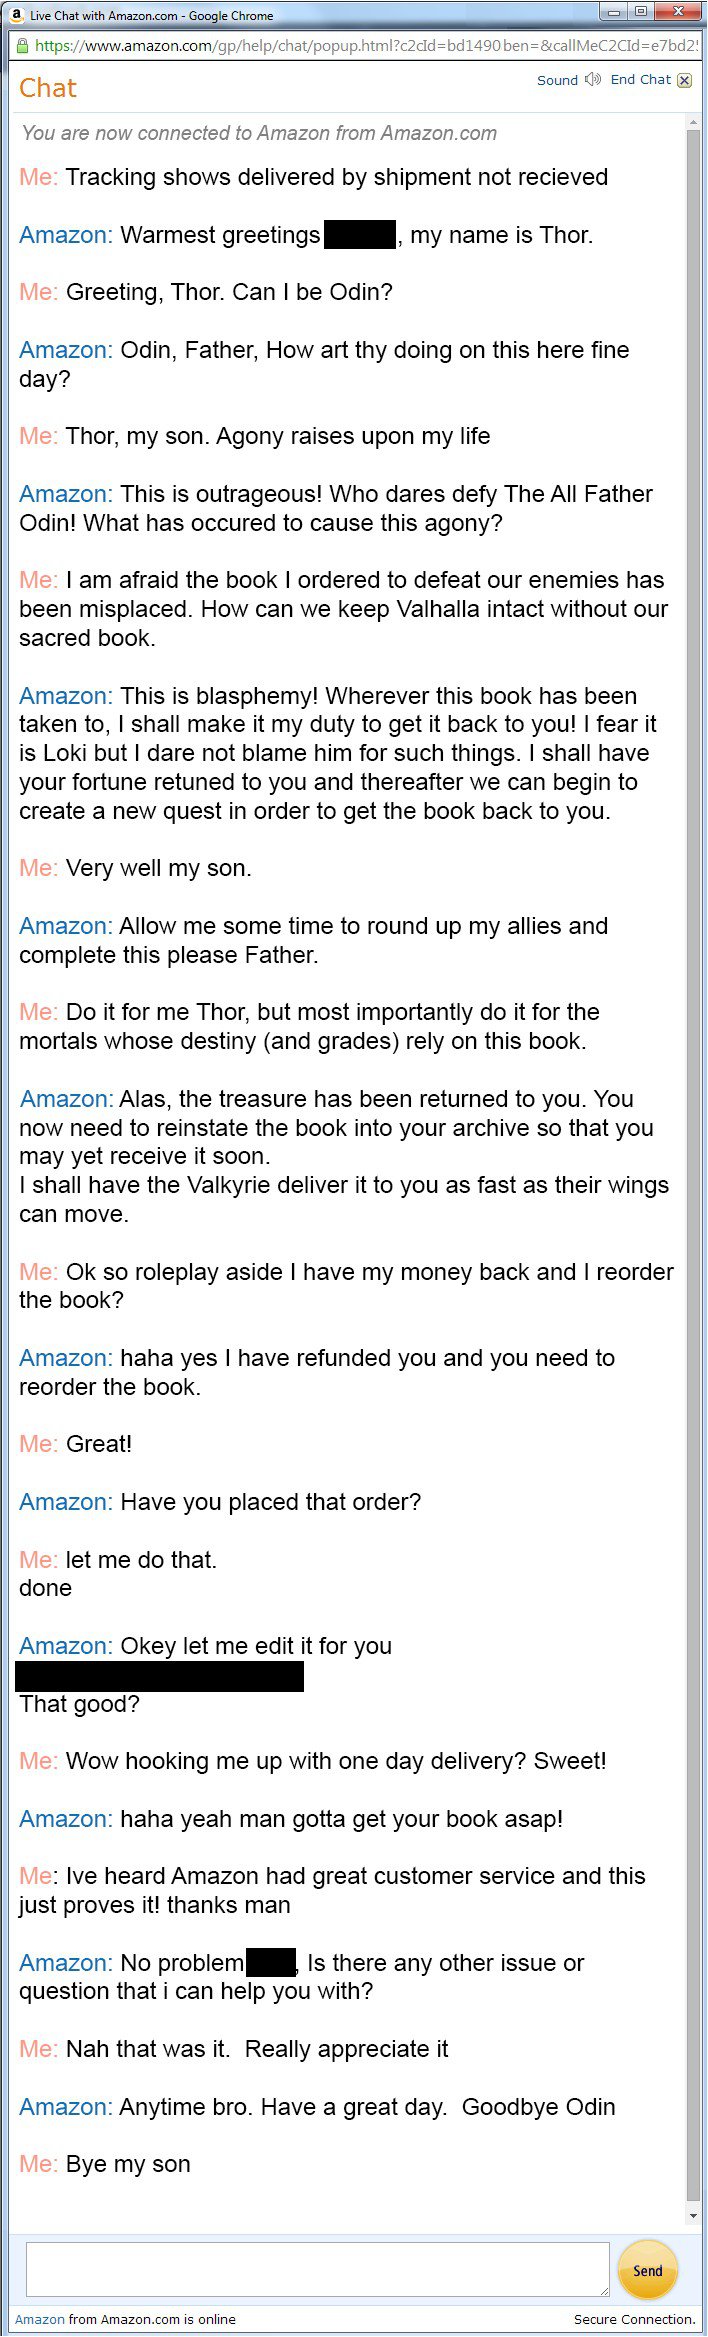 Thor Works for Amazon Customer Service